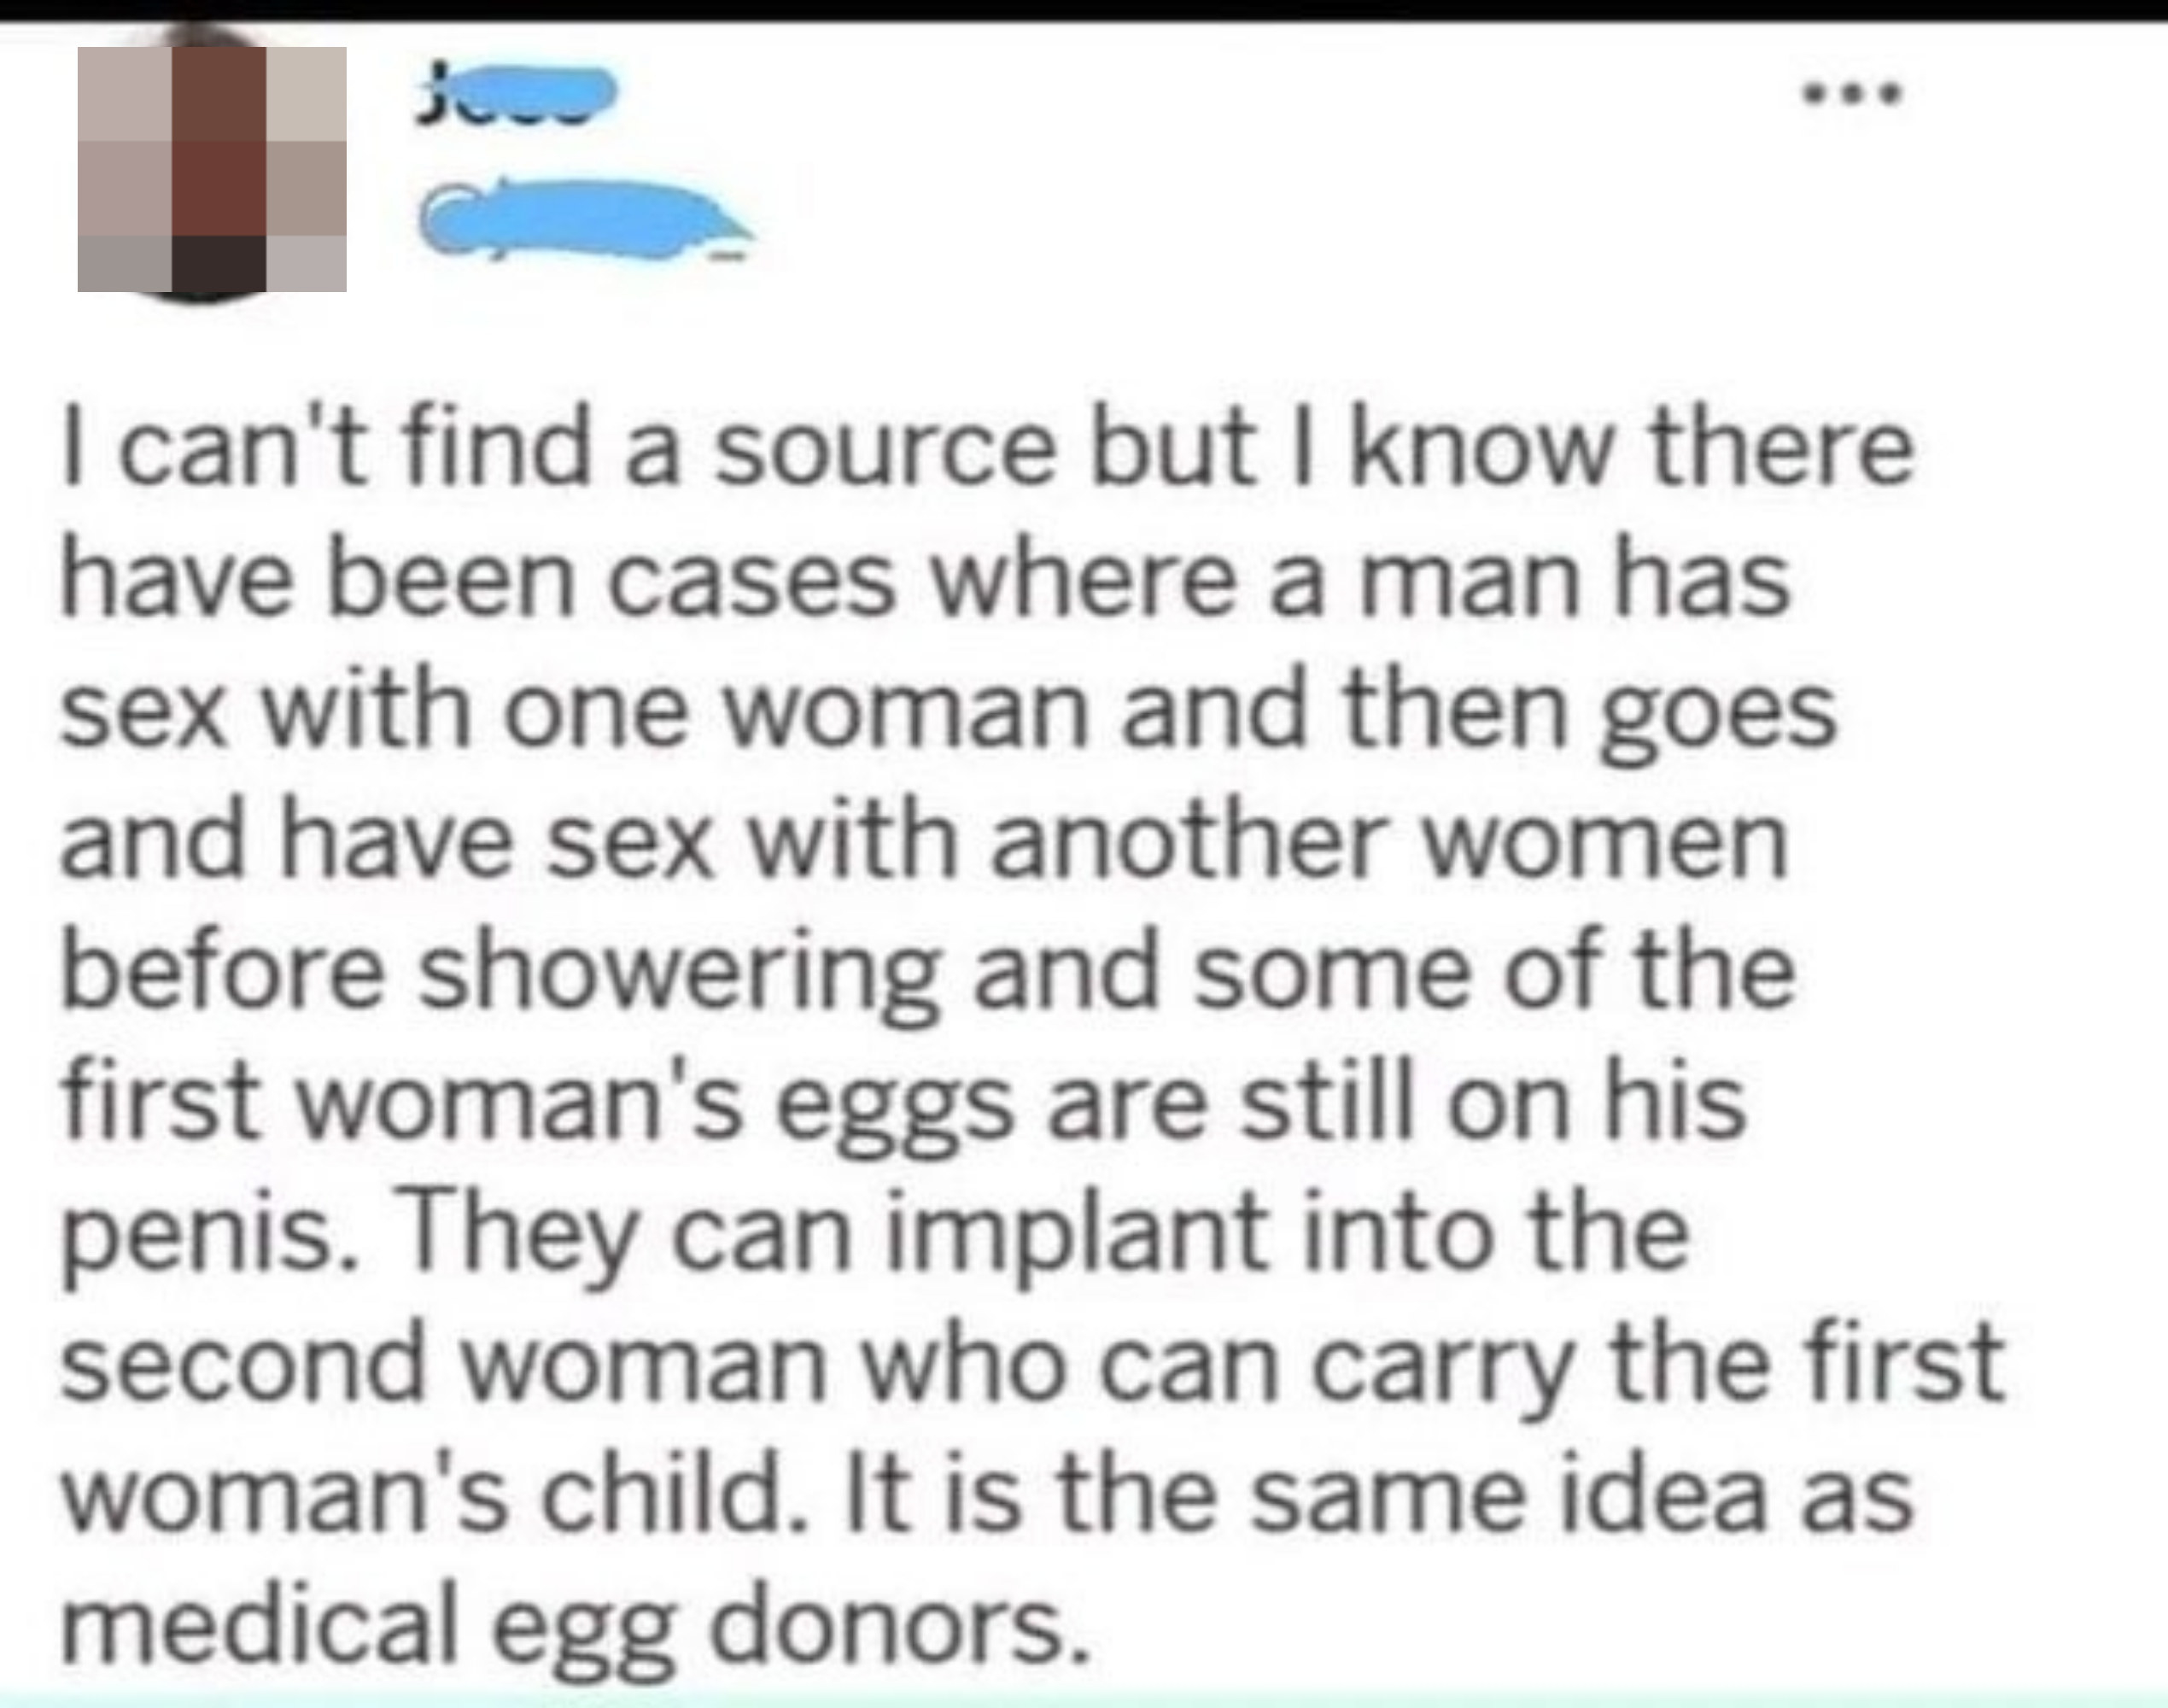 a person saying that men can carry a woman&#x27;s eggs after having sex to another woman if he doesn&#x27;t shower in between. it&#x27;s the same as medical egg donors, they say